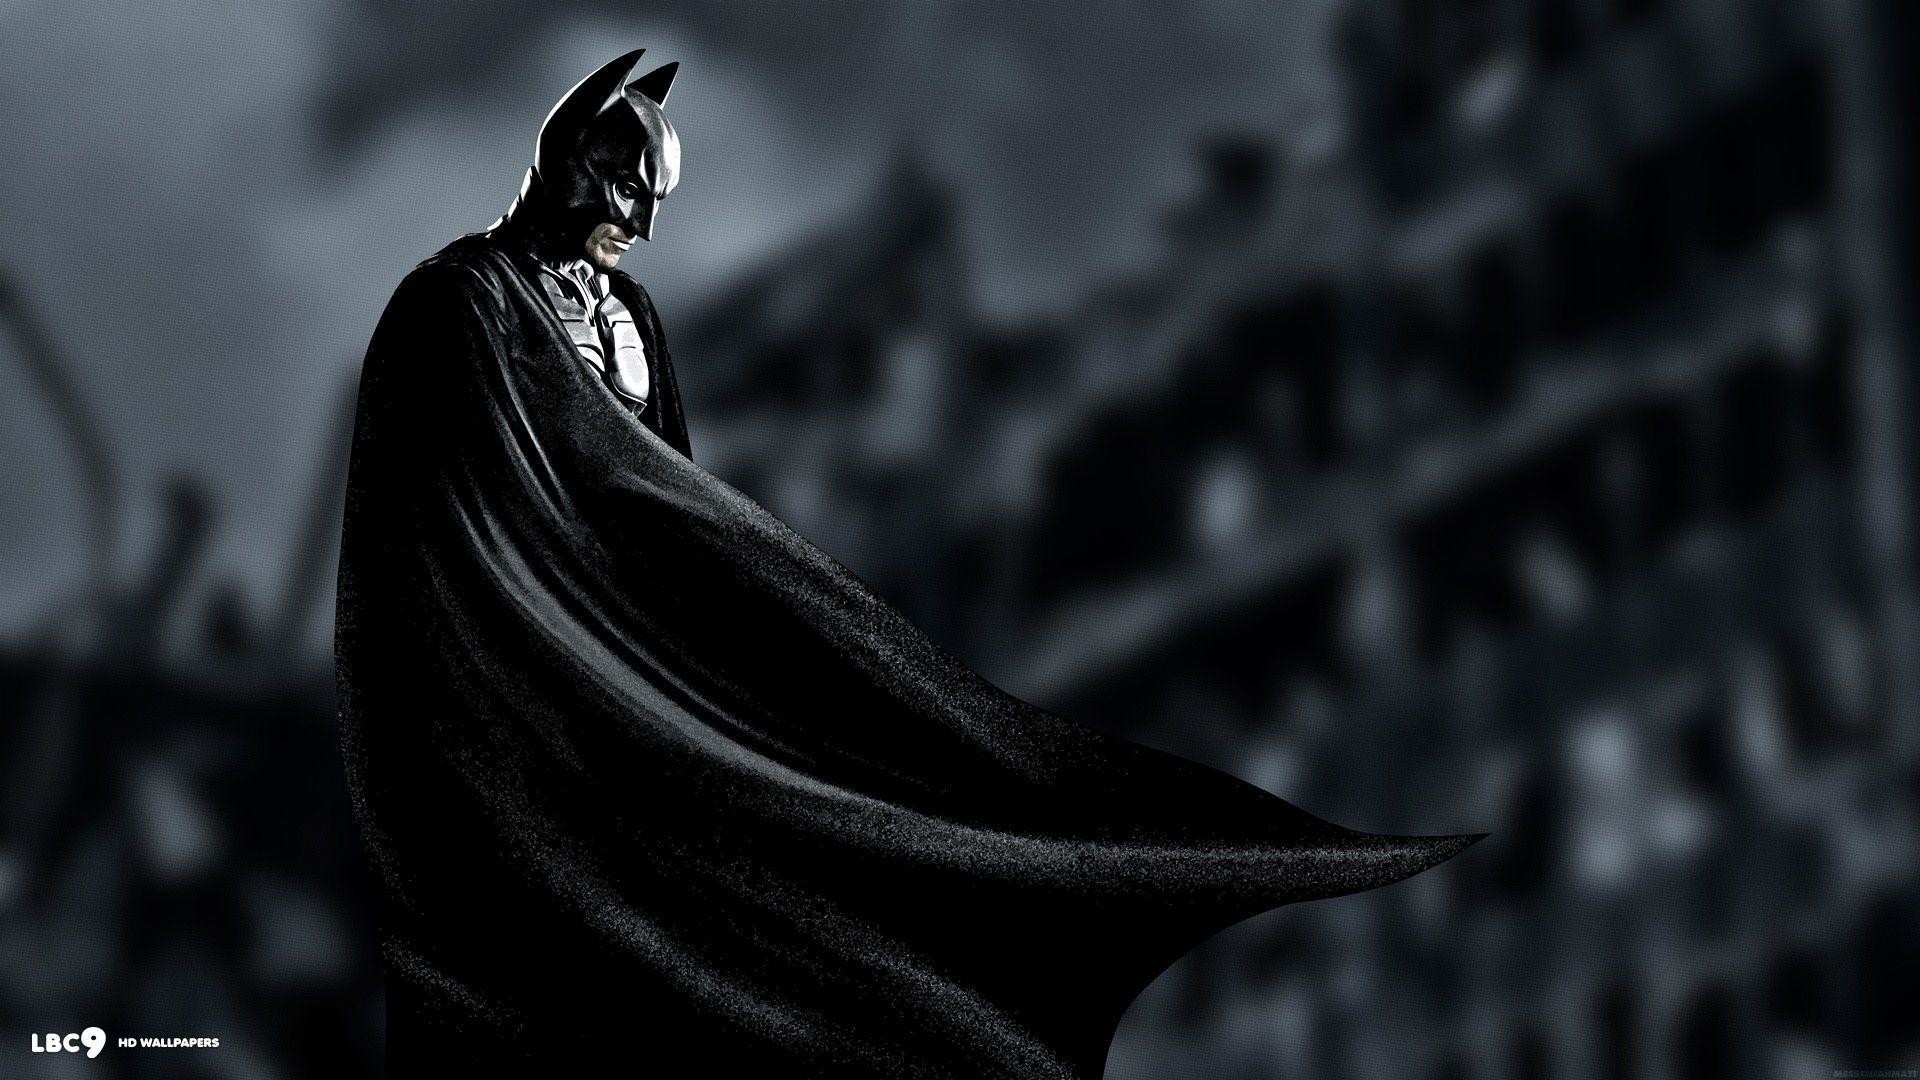 1920x1080 Wallpapers For > Batman Wallpapers Hd 1080p